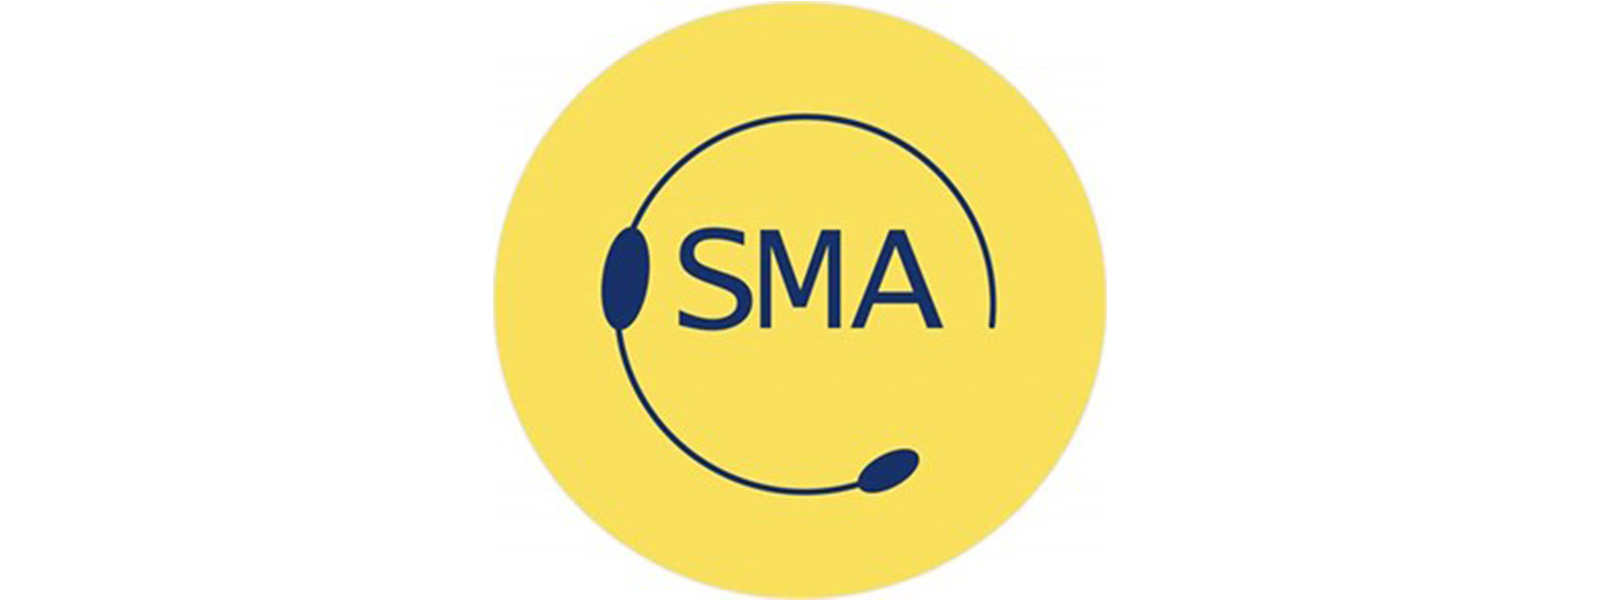 the letters S M A on a yellow circle